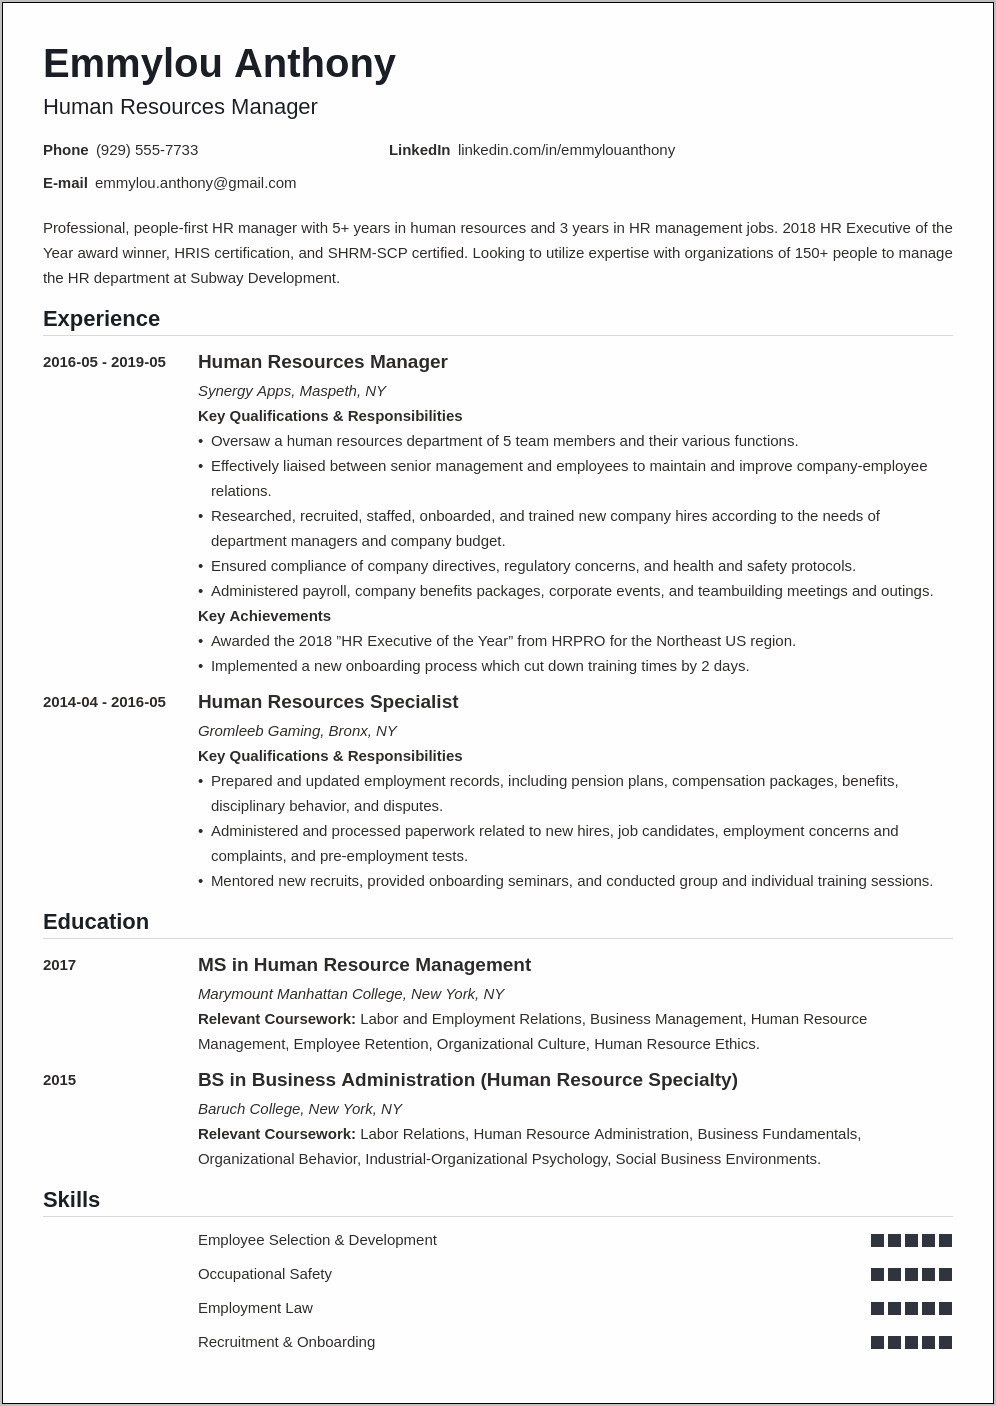 Human Resource Specialist Resume Objective